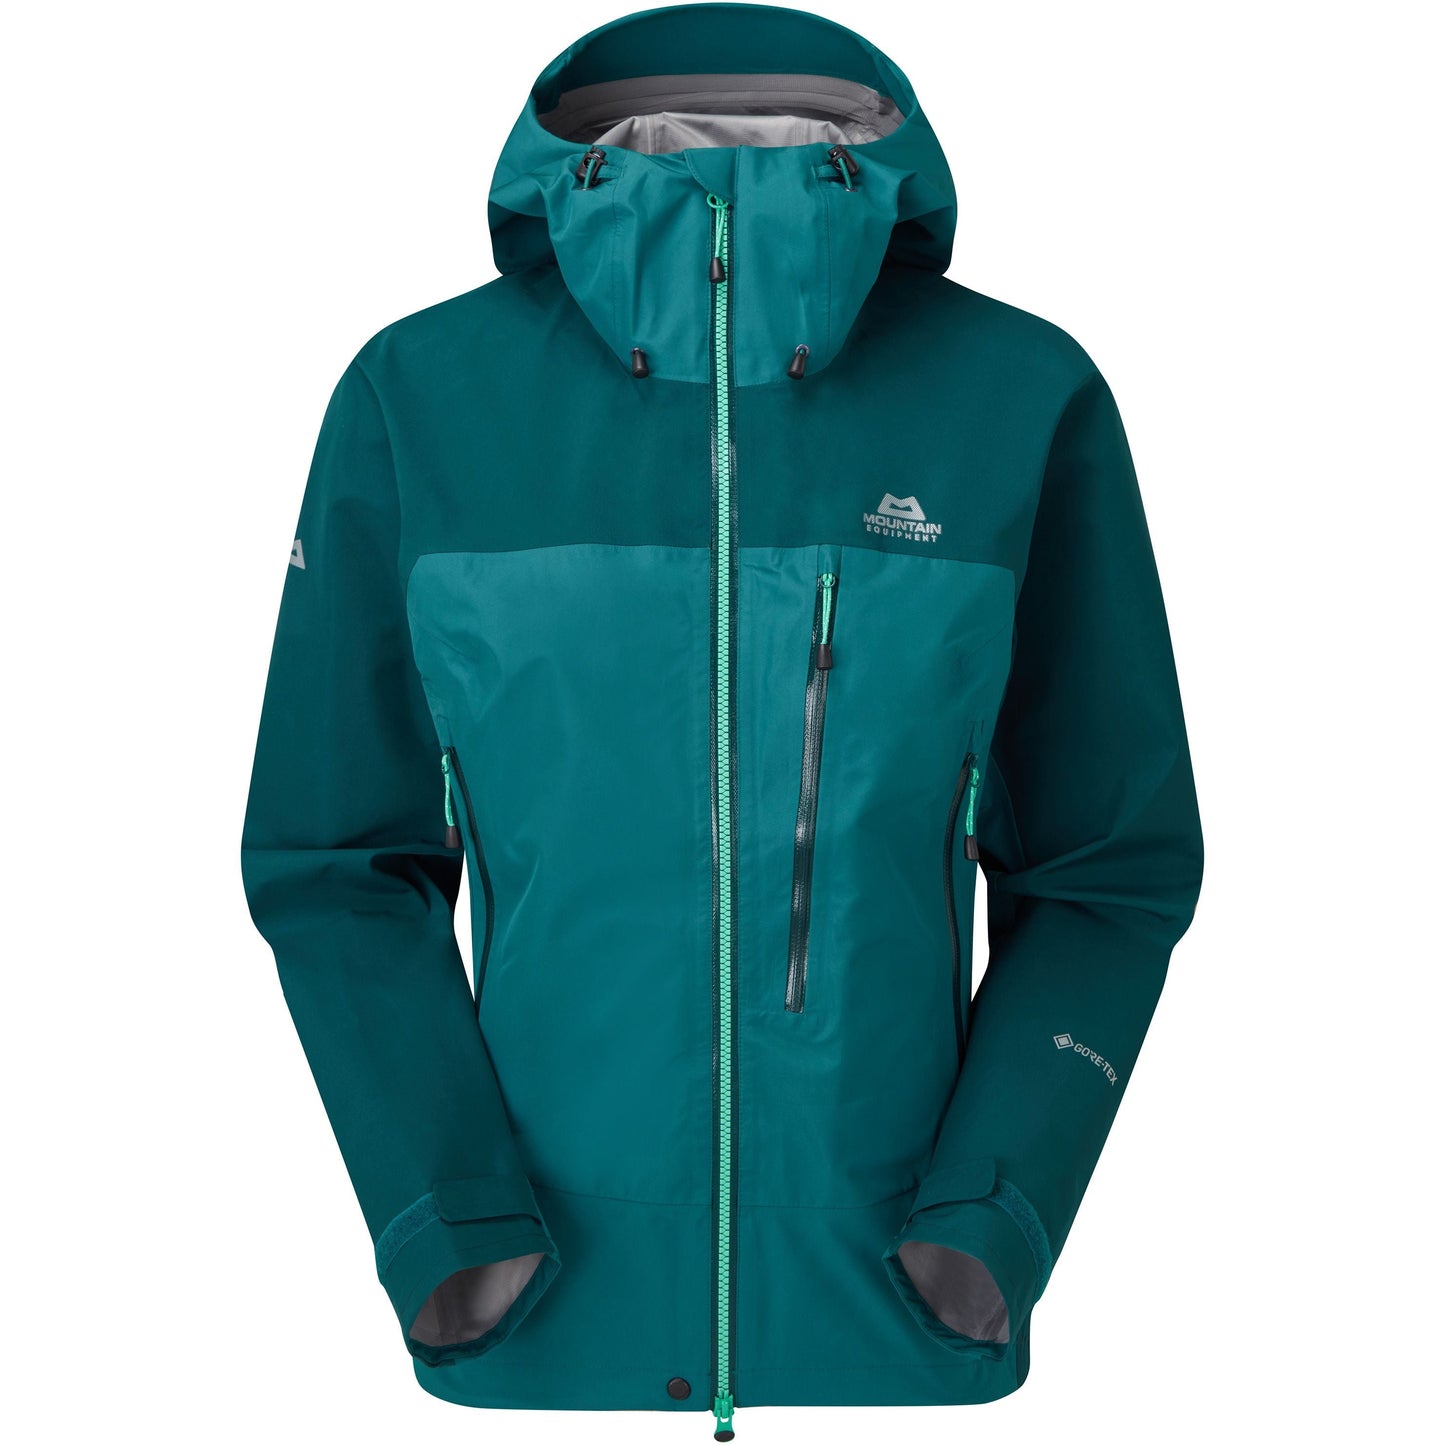 Mountain Equipment Women's Makalu Jacket A highly protective GORE-TEX jacket for hiking and mountaineering that blends function, weight and durability.